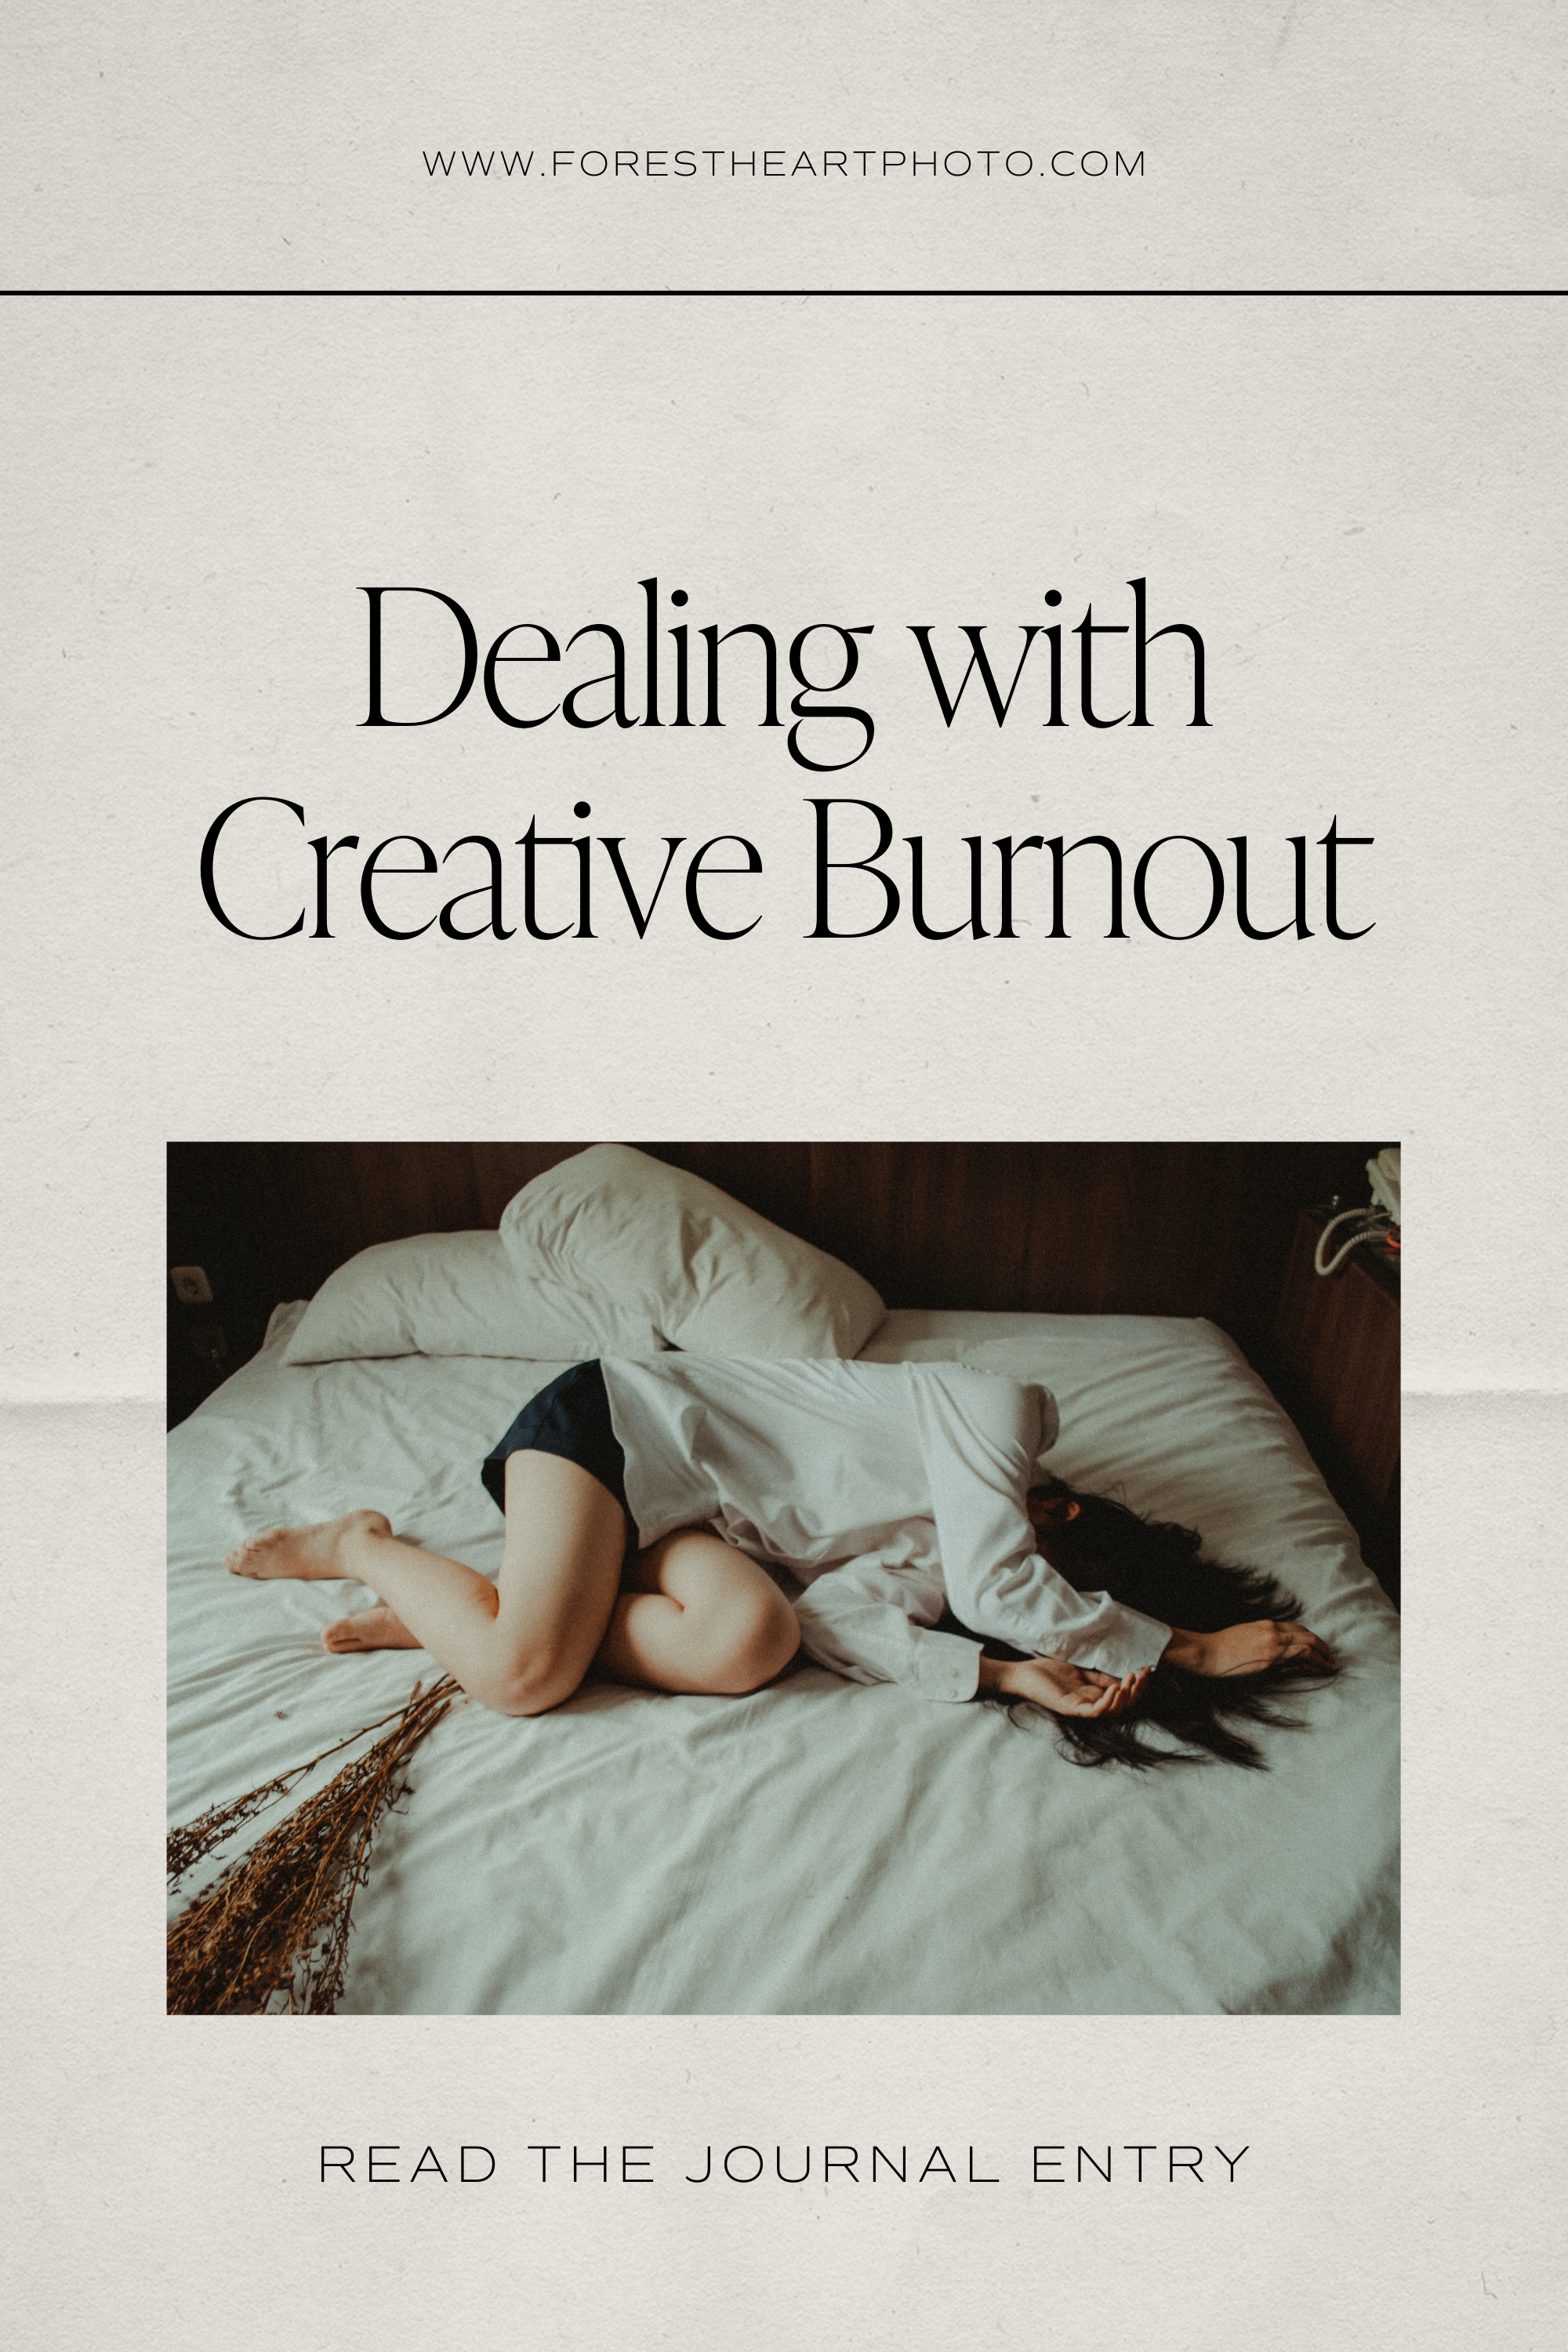 Dealing with creative burnout